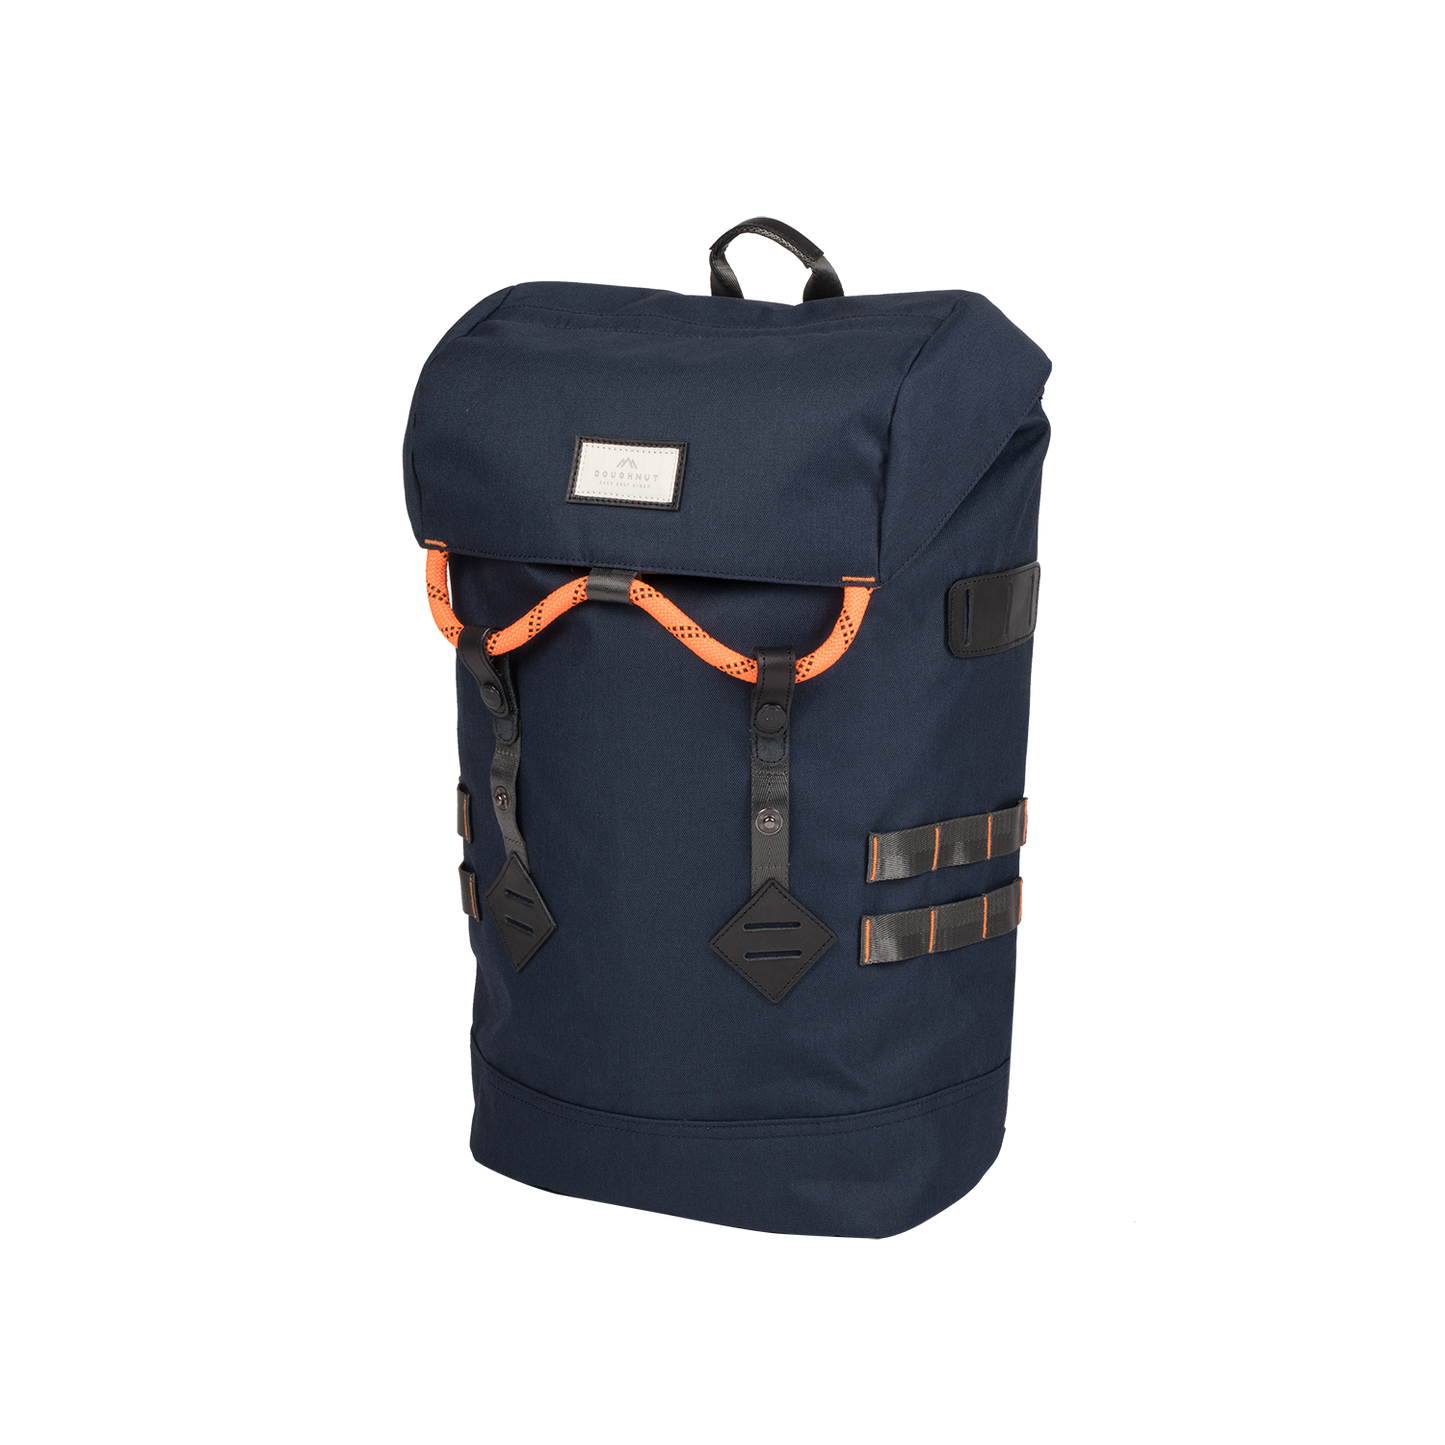 Colorado Accents Series Backpack